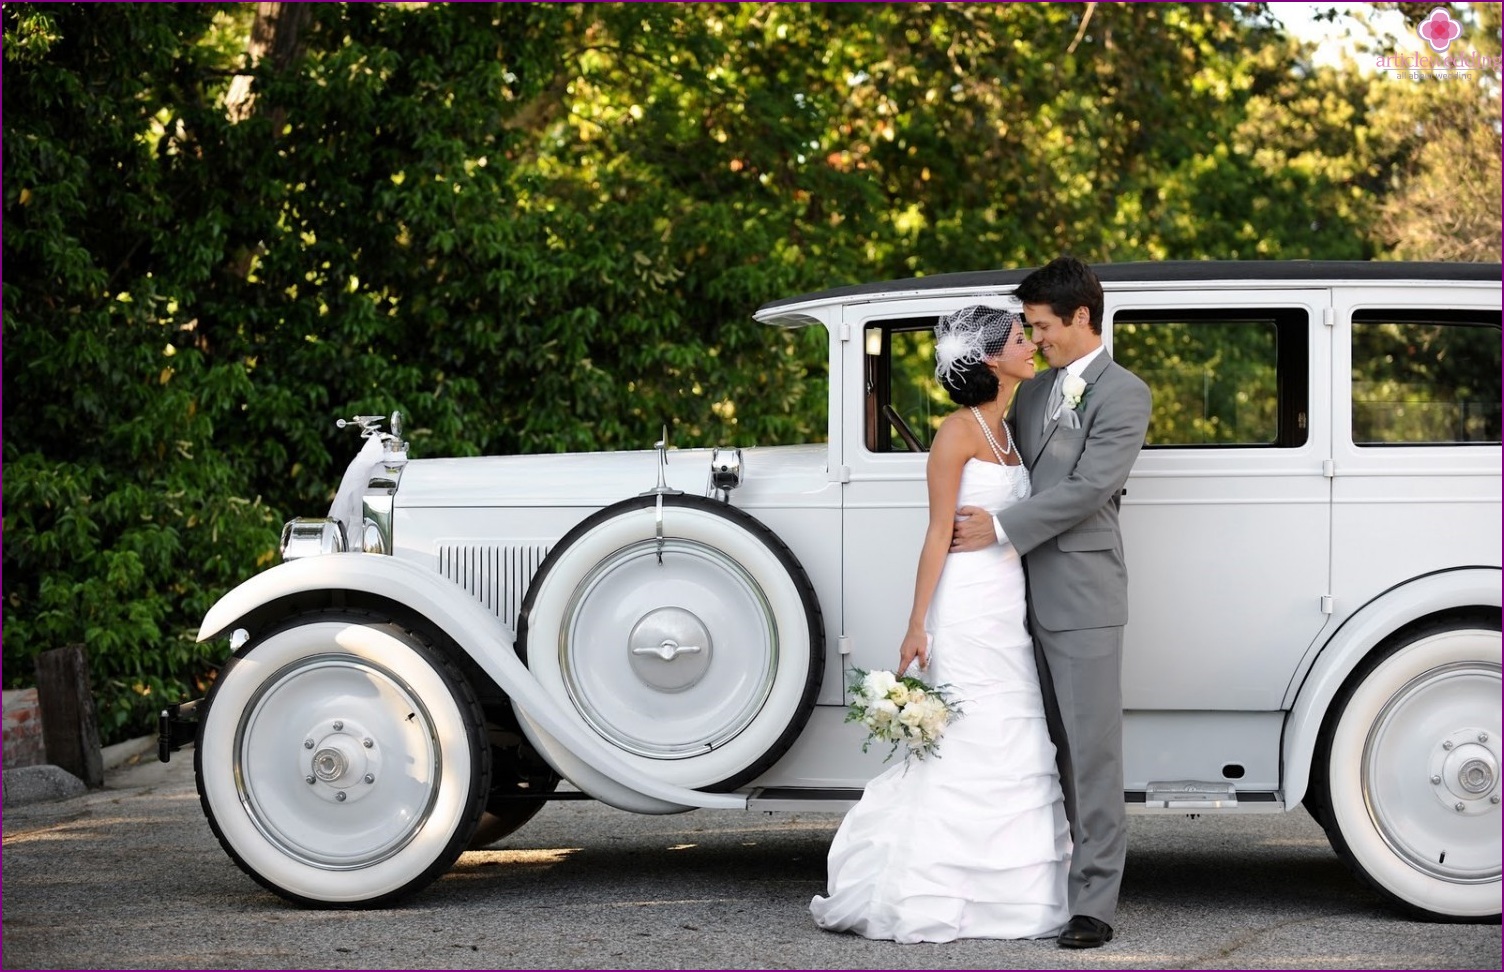 Retro car for the wedding in the style of the Great Gatsby